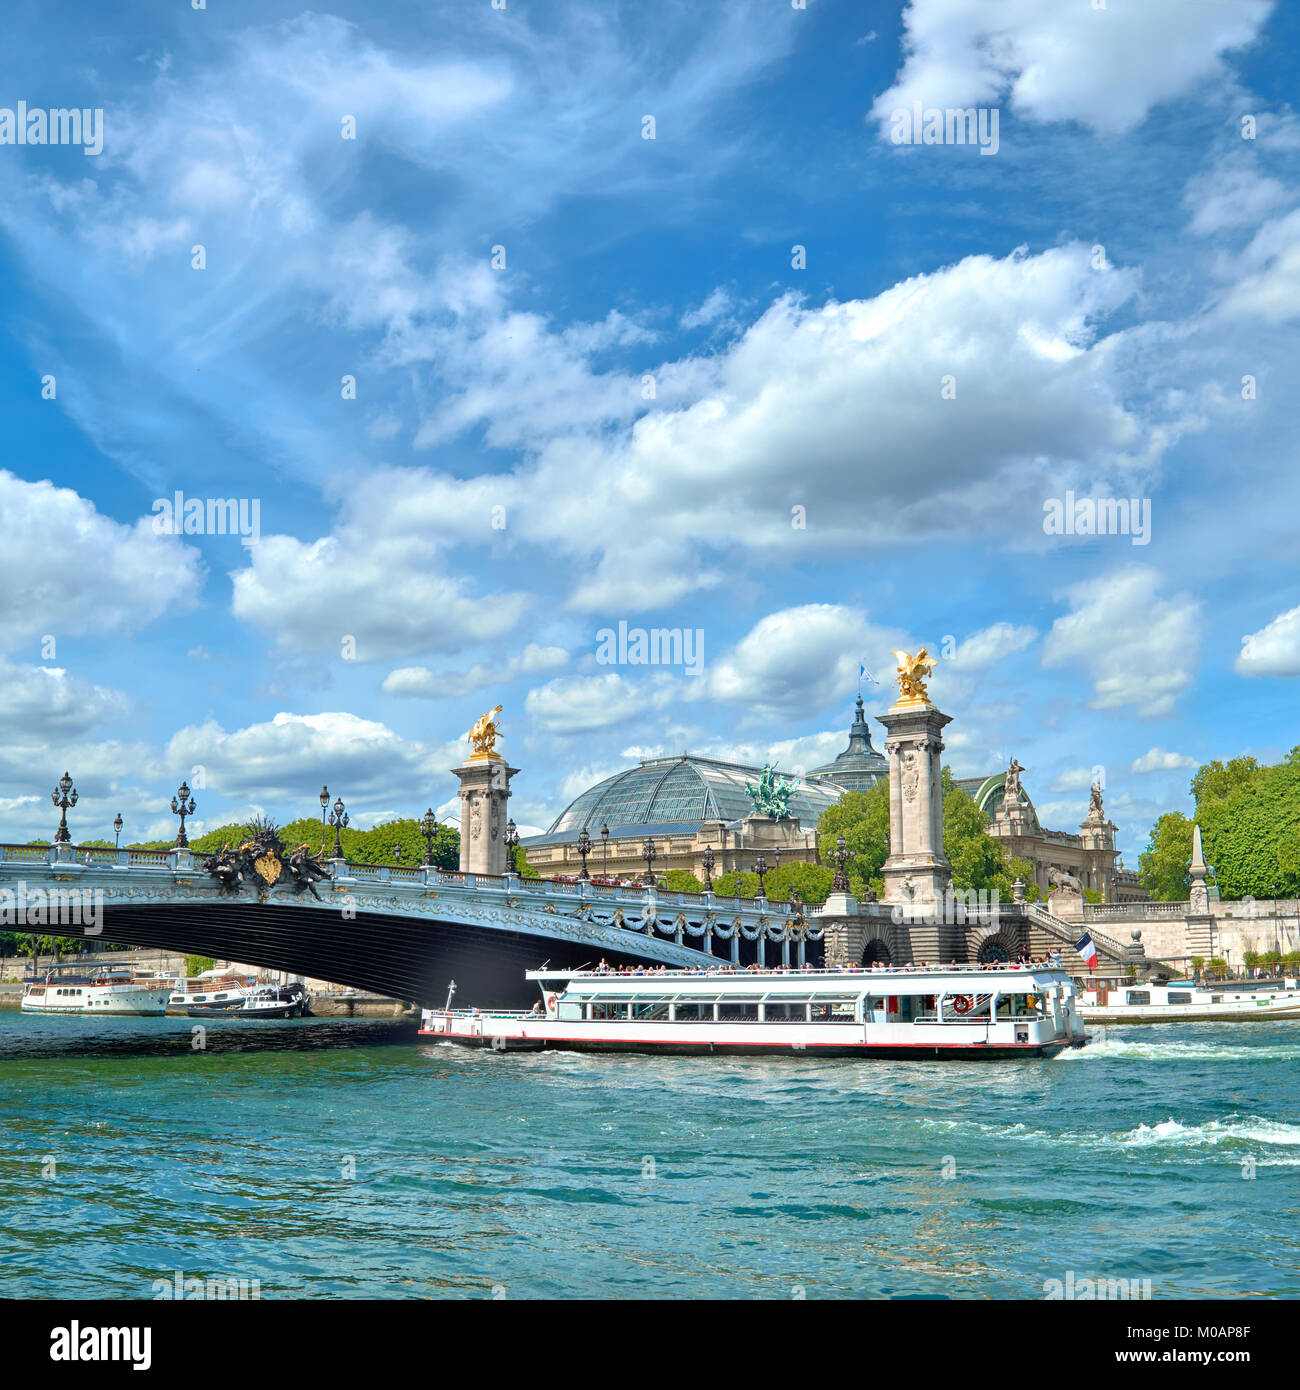 Paris, France, passenger boat passes under Alexander III bridge on Seine river in Spring. Panoramic image, square composition. Stock Photo